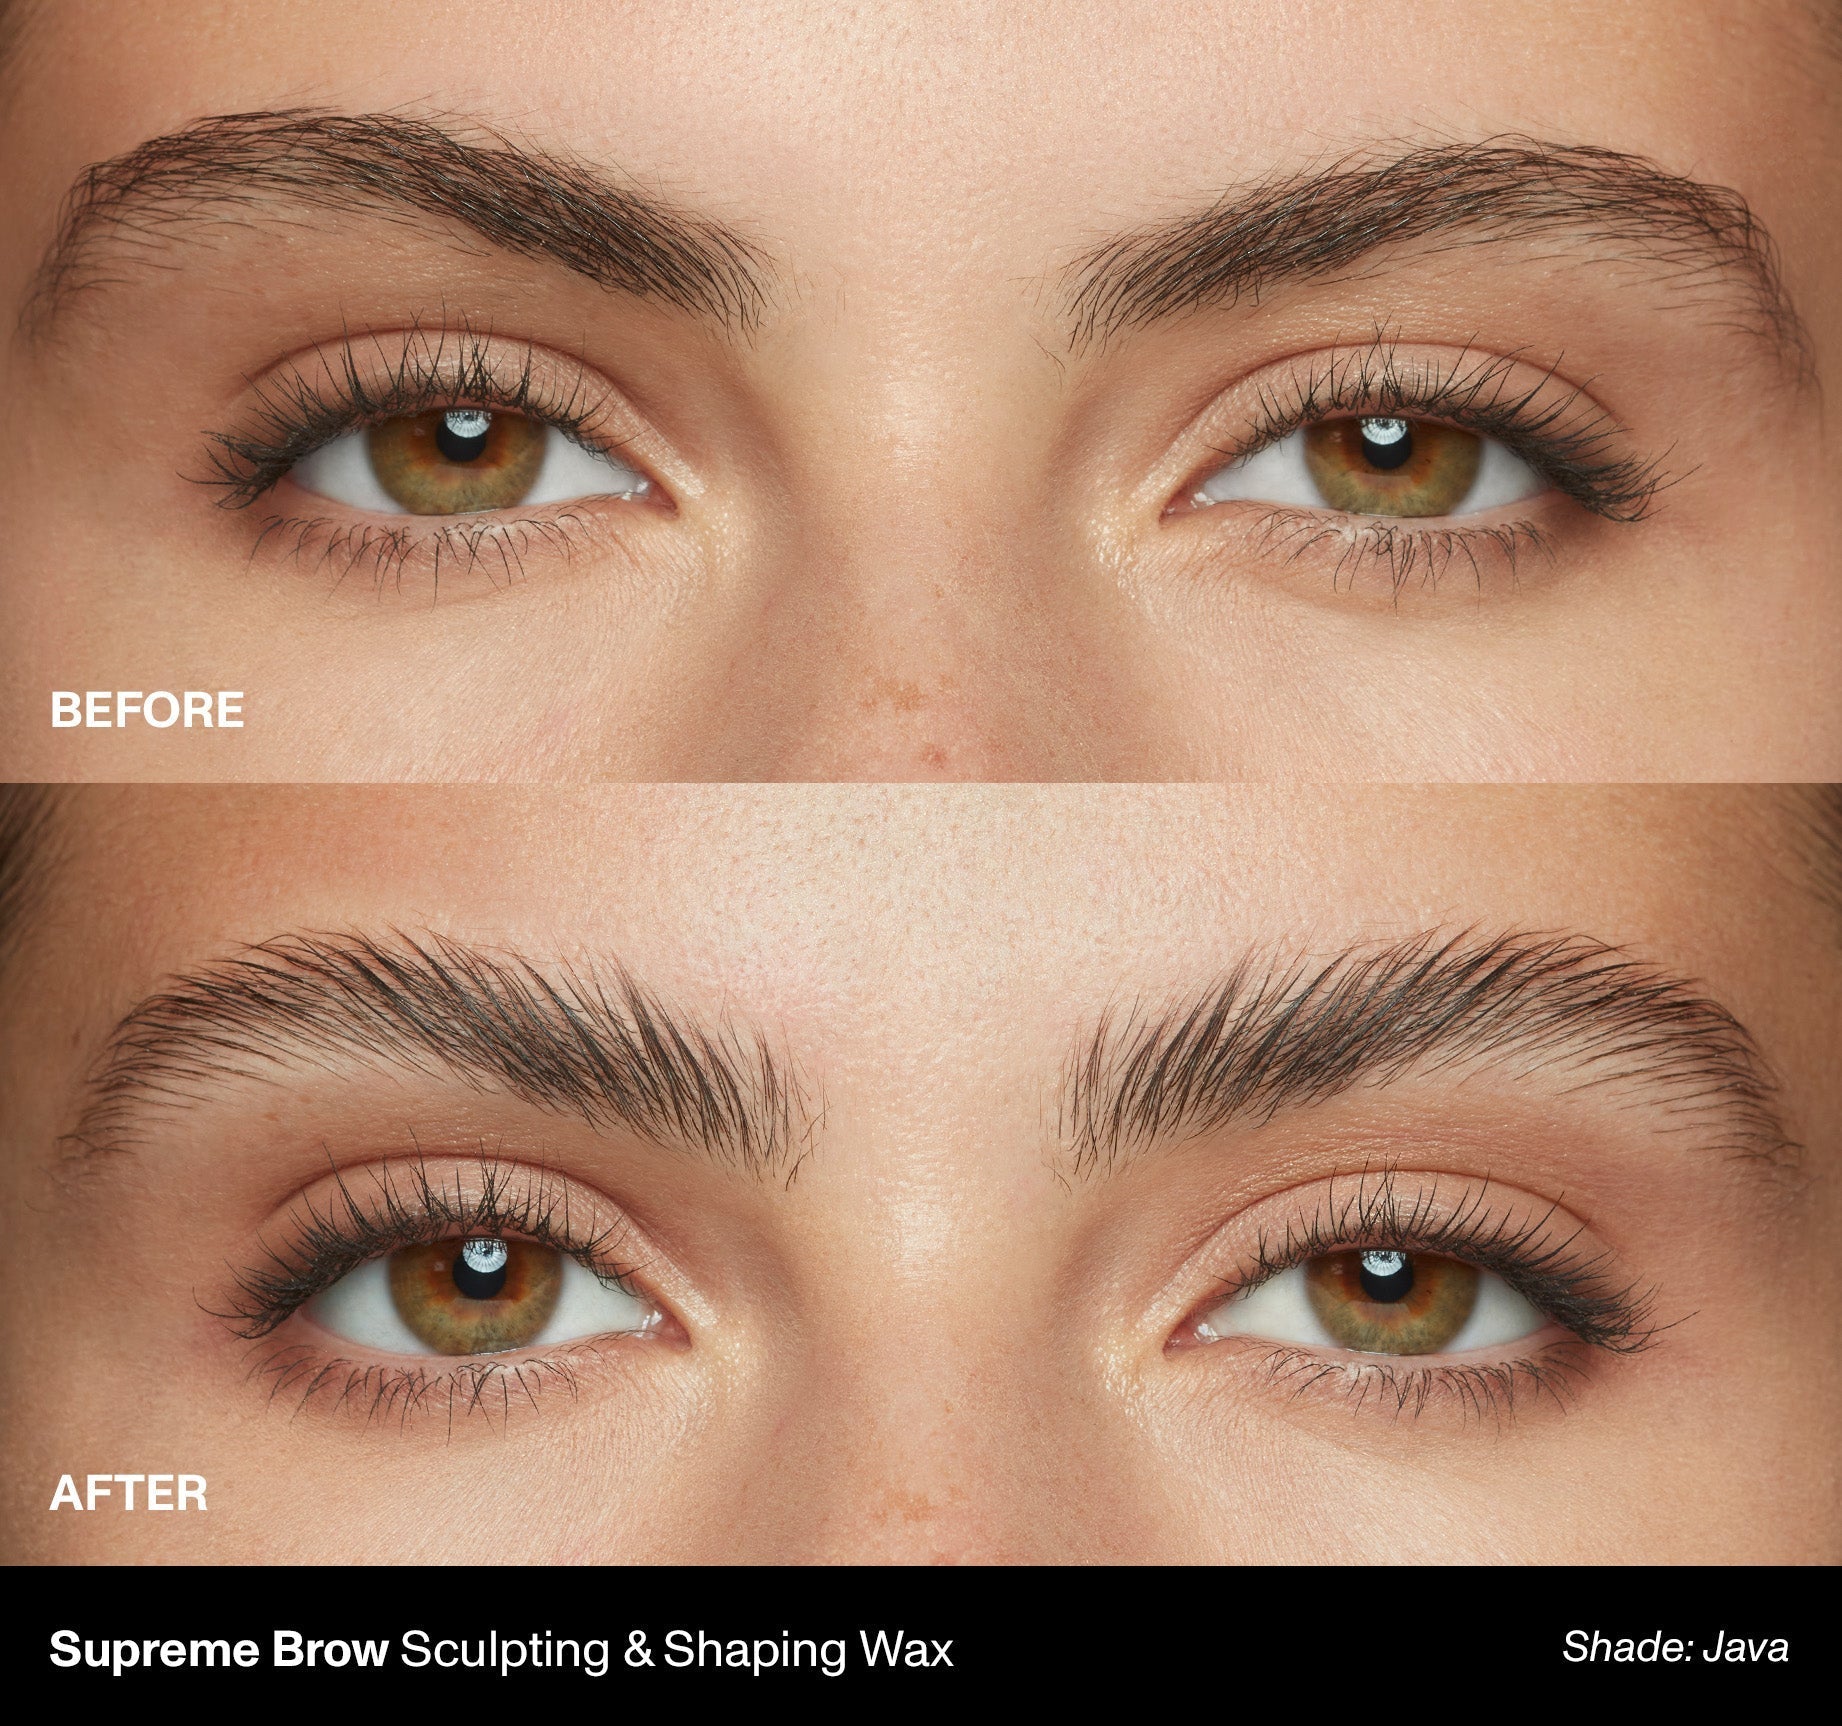 Supreme Brow Sculpting And Shaping Wax - Java - Image 6